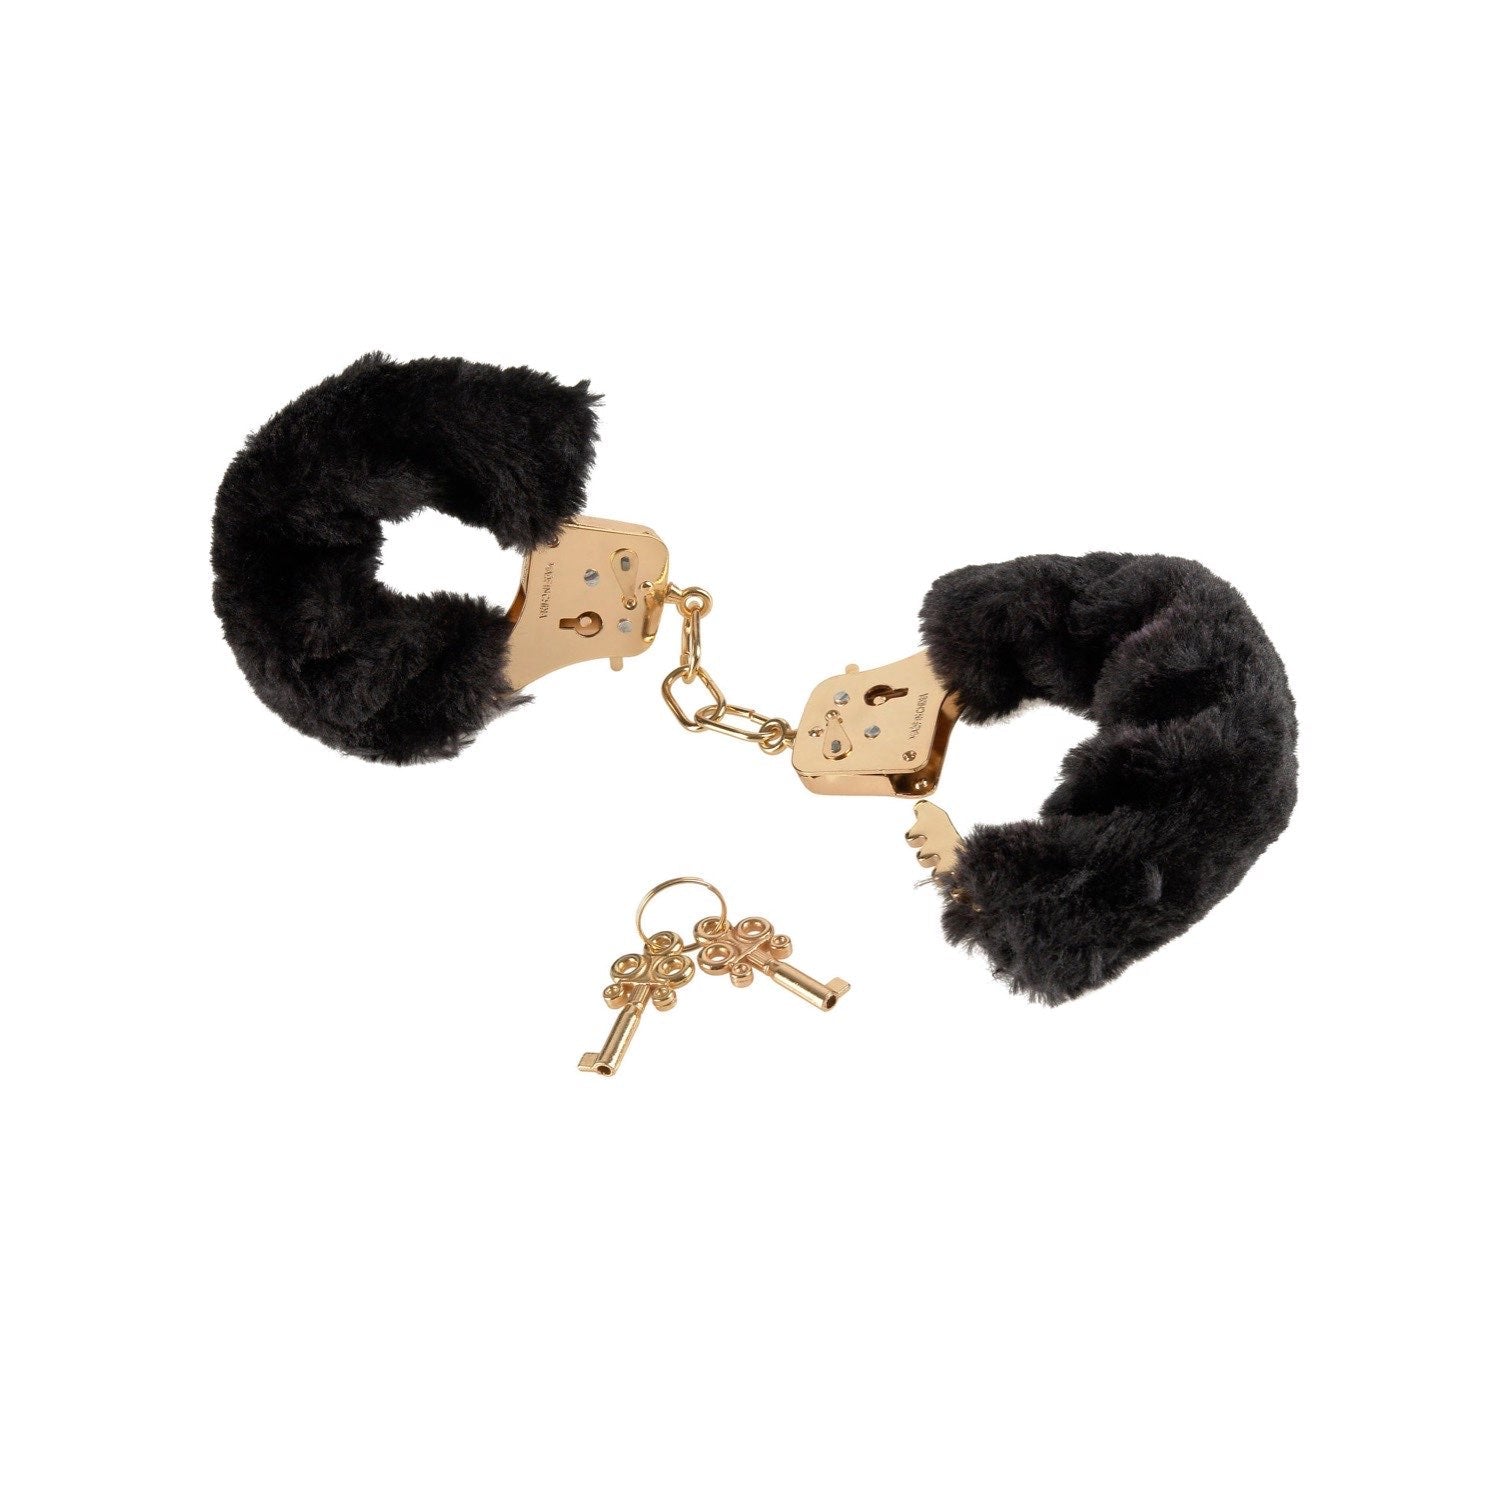 Fetish Fantasy Gold Deluxe Furry Cuffs - Black/Gold Furry Restraints by Pipedream